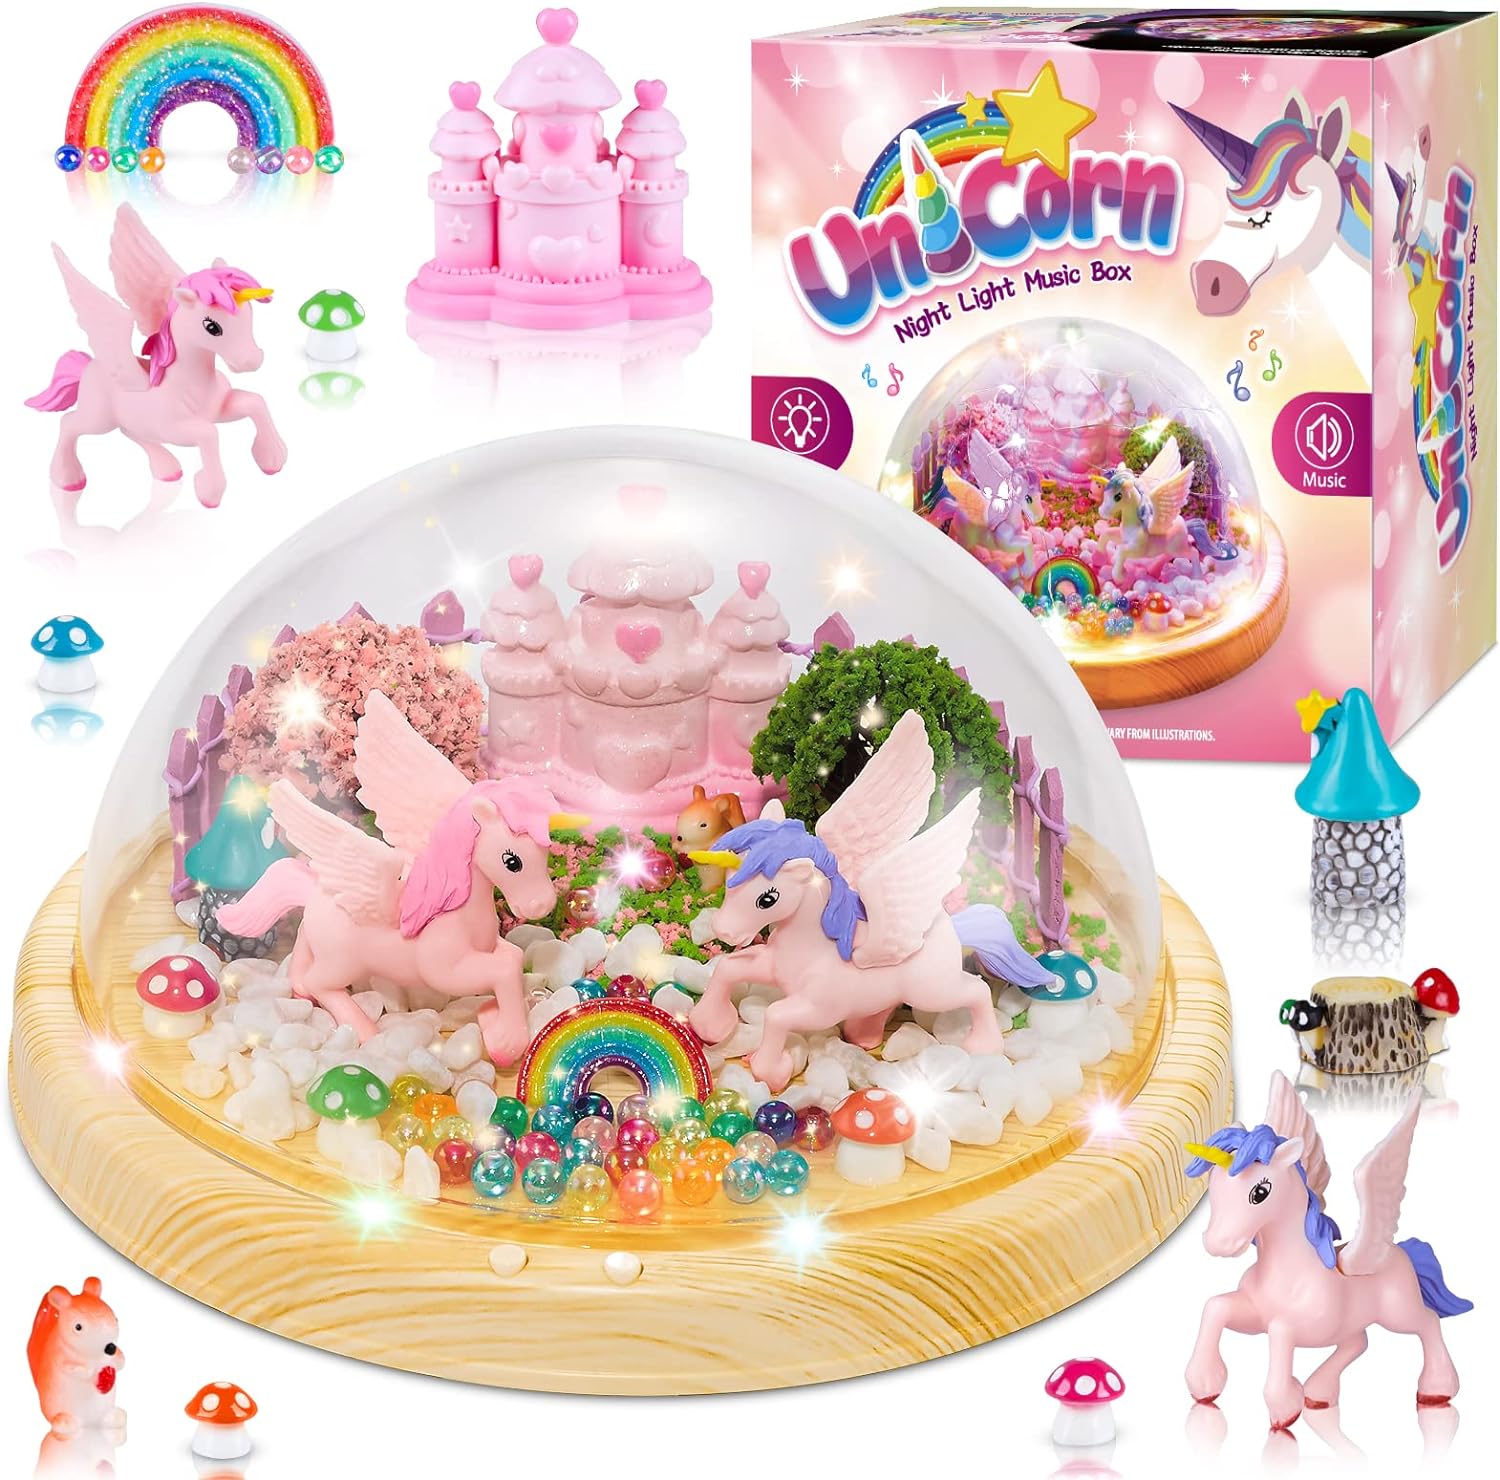 Make Your Own Unicorn Night Light - Unicorn Terrarium Kit for Kids, Arts and Crafts Nightlight Novelty for Girl Age 4 to 9 Years Old, Unicorns Gifts for Girls